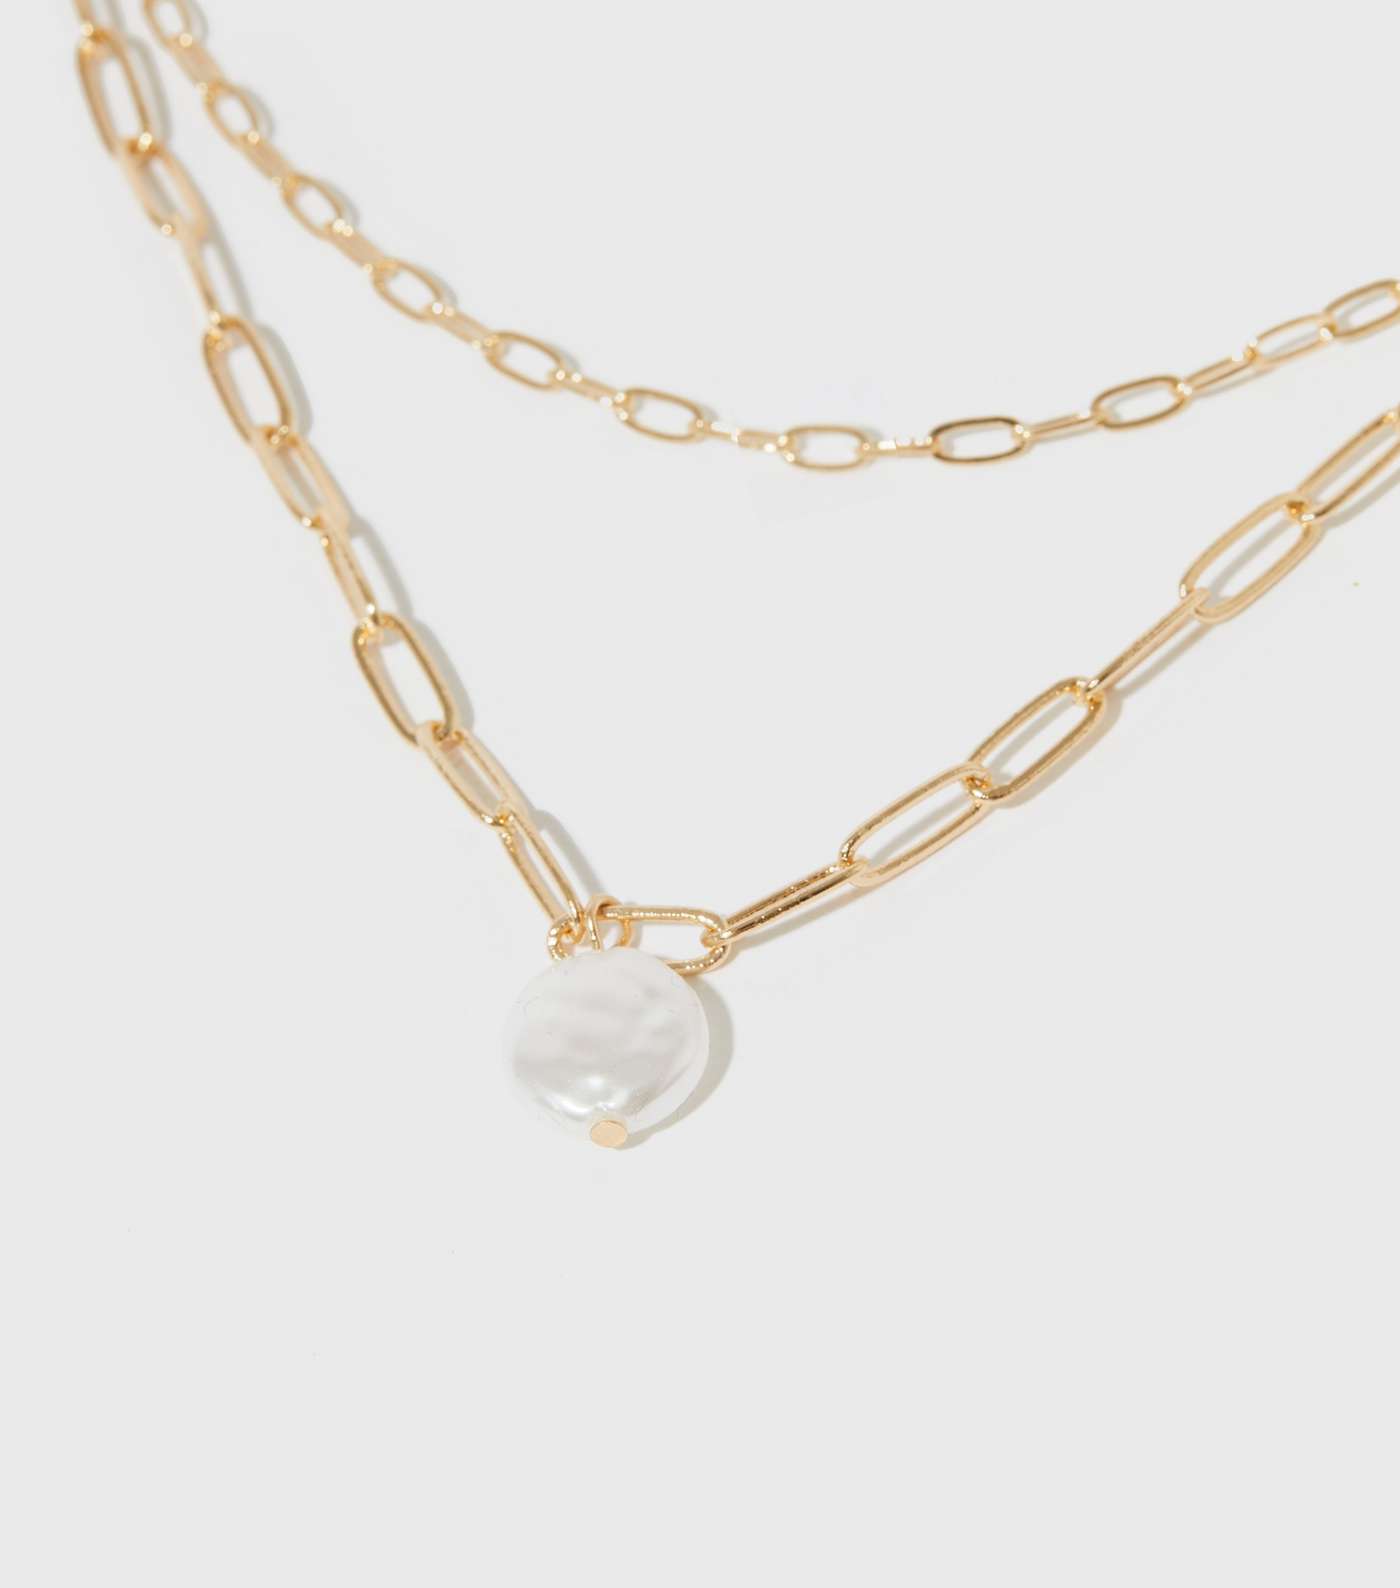 Gold Faux Pearl Pendant Layered Chain Necklace Image 2